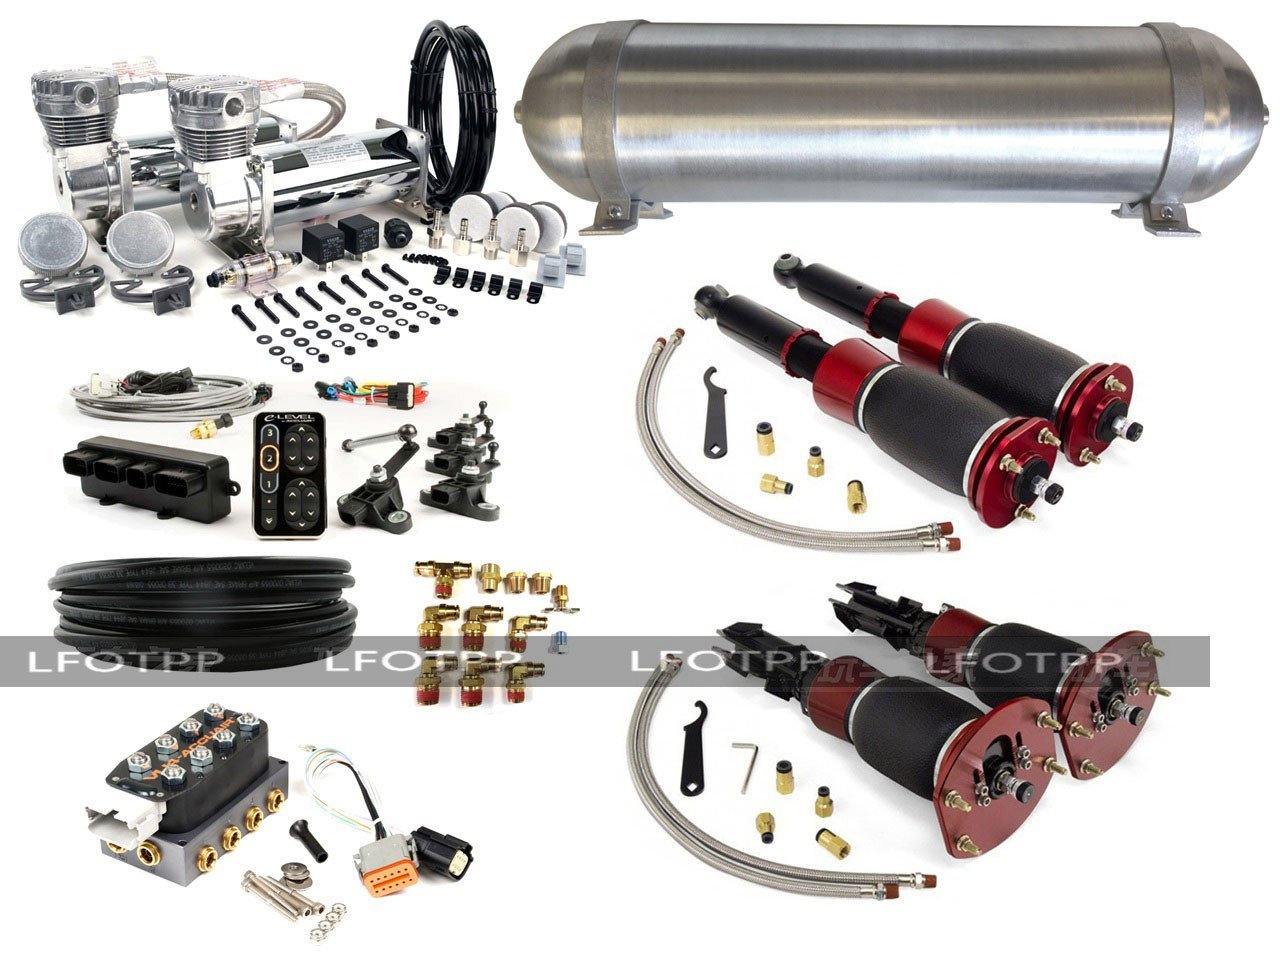 How to modify the pneumatic suspension? What is the principle of pneumatic suspension? | LFOTPP